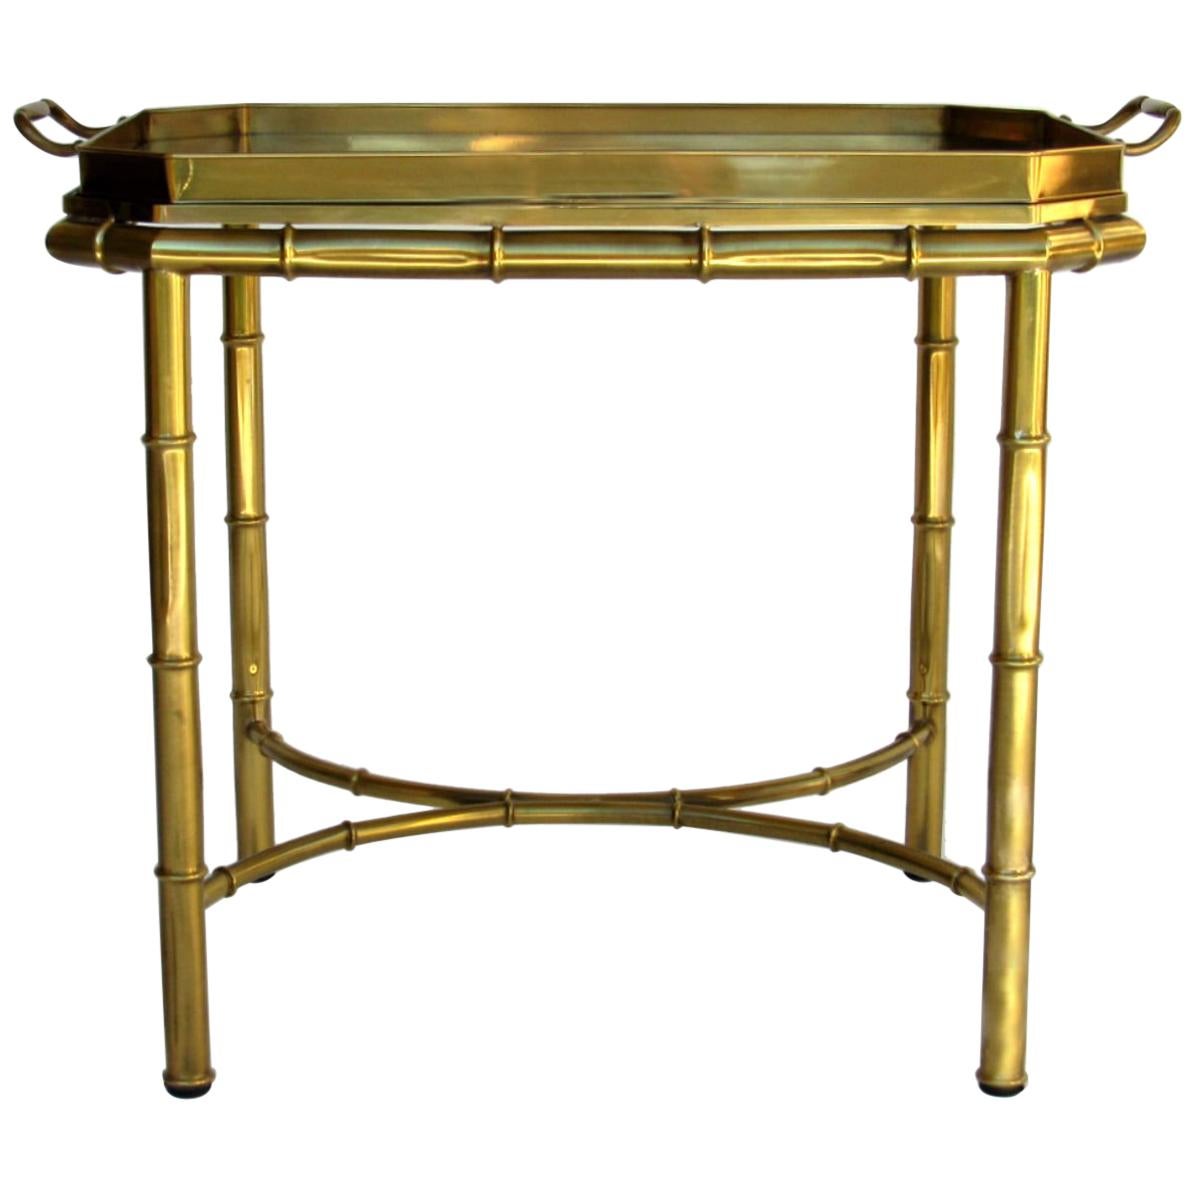 Mastercraft Bamboo Tray Table in Antique Brass, USA, 1960s-1970s